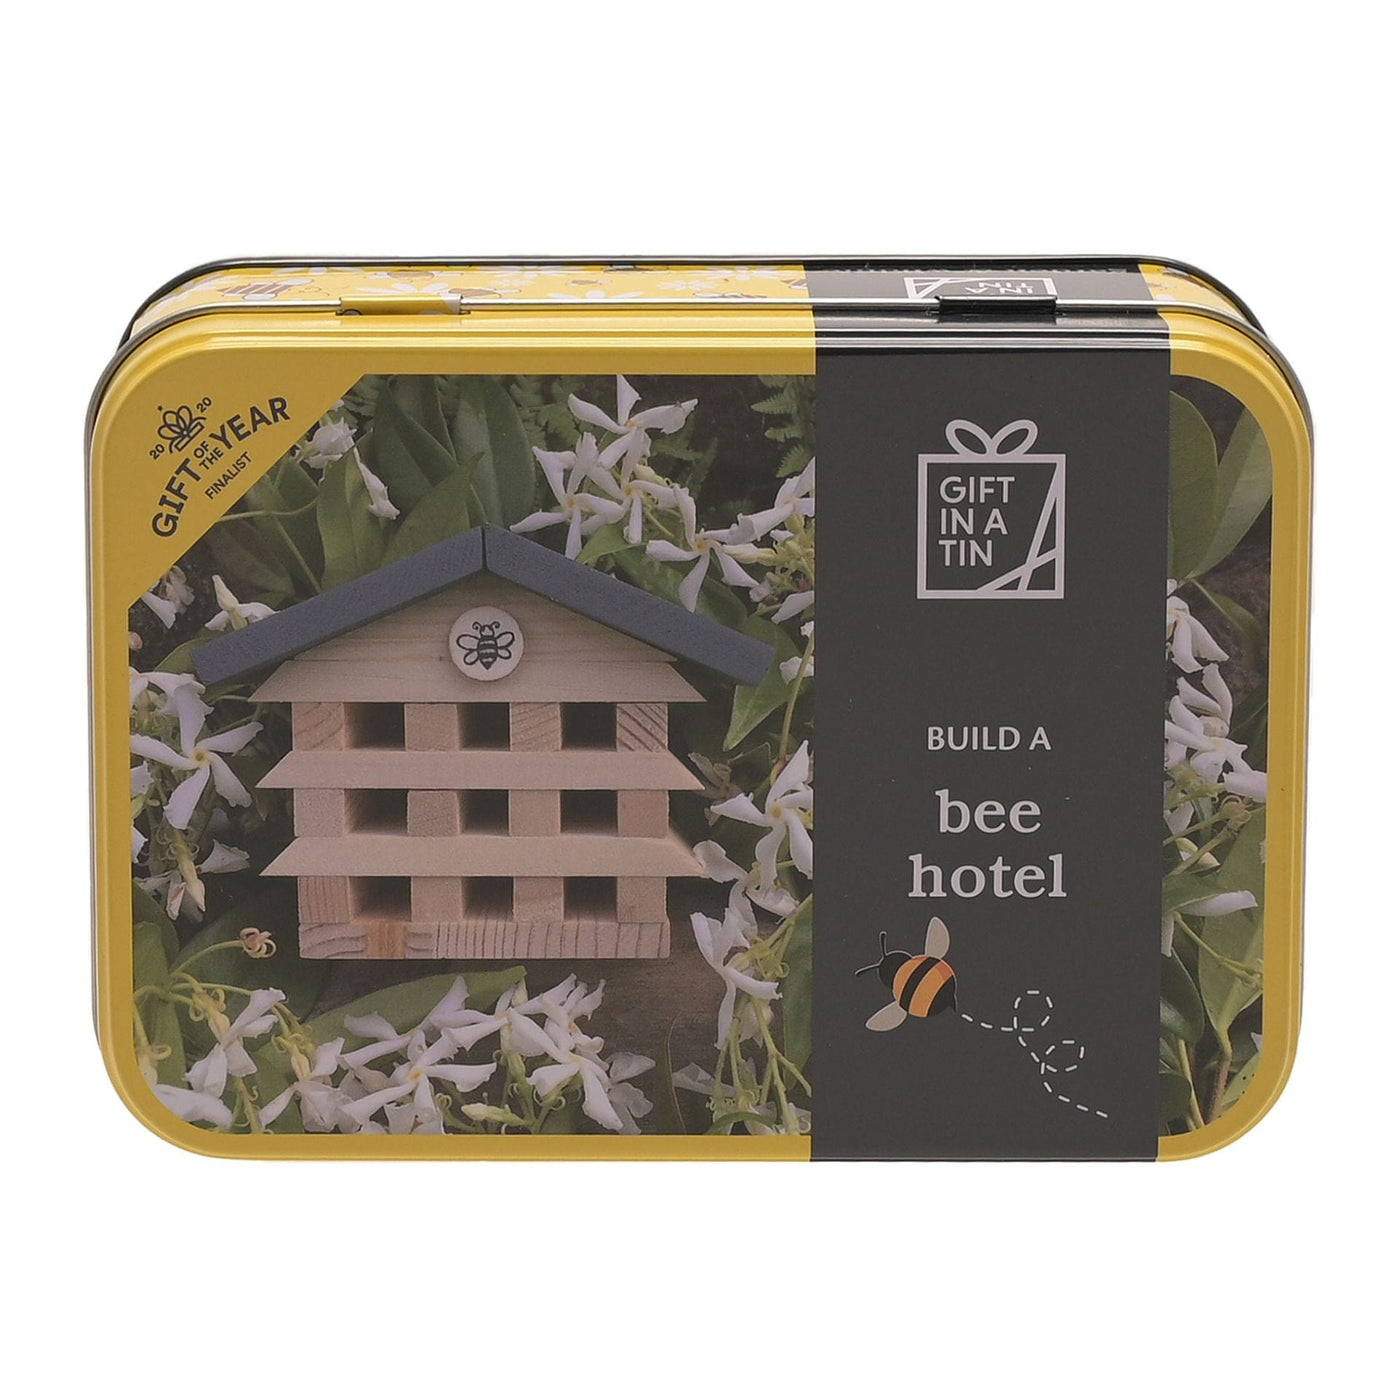 Widdop Gifts Novelty Gifts Build a Bee Hotel Gift in a Tin